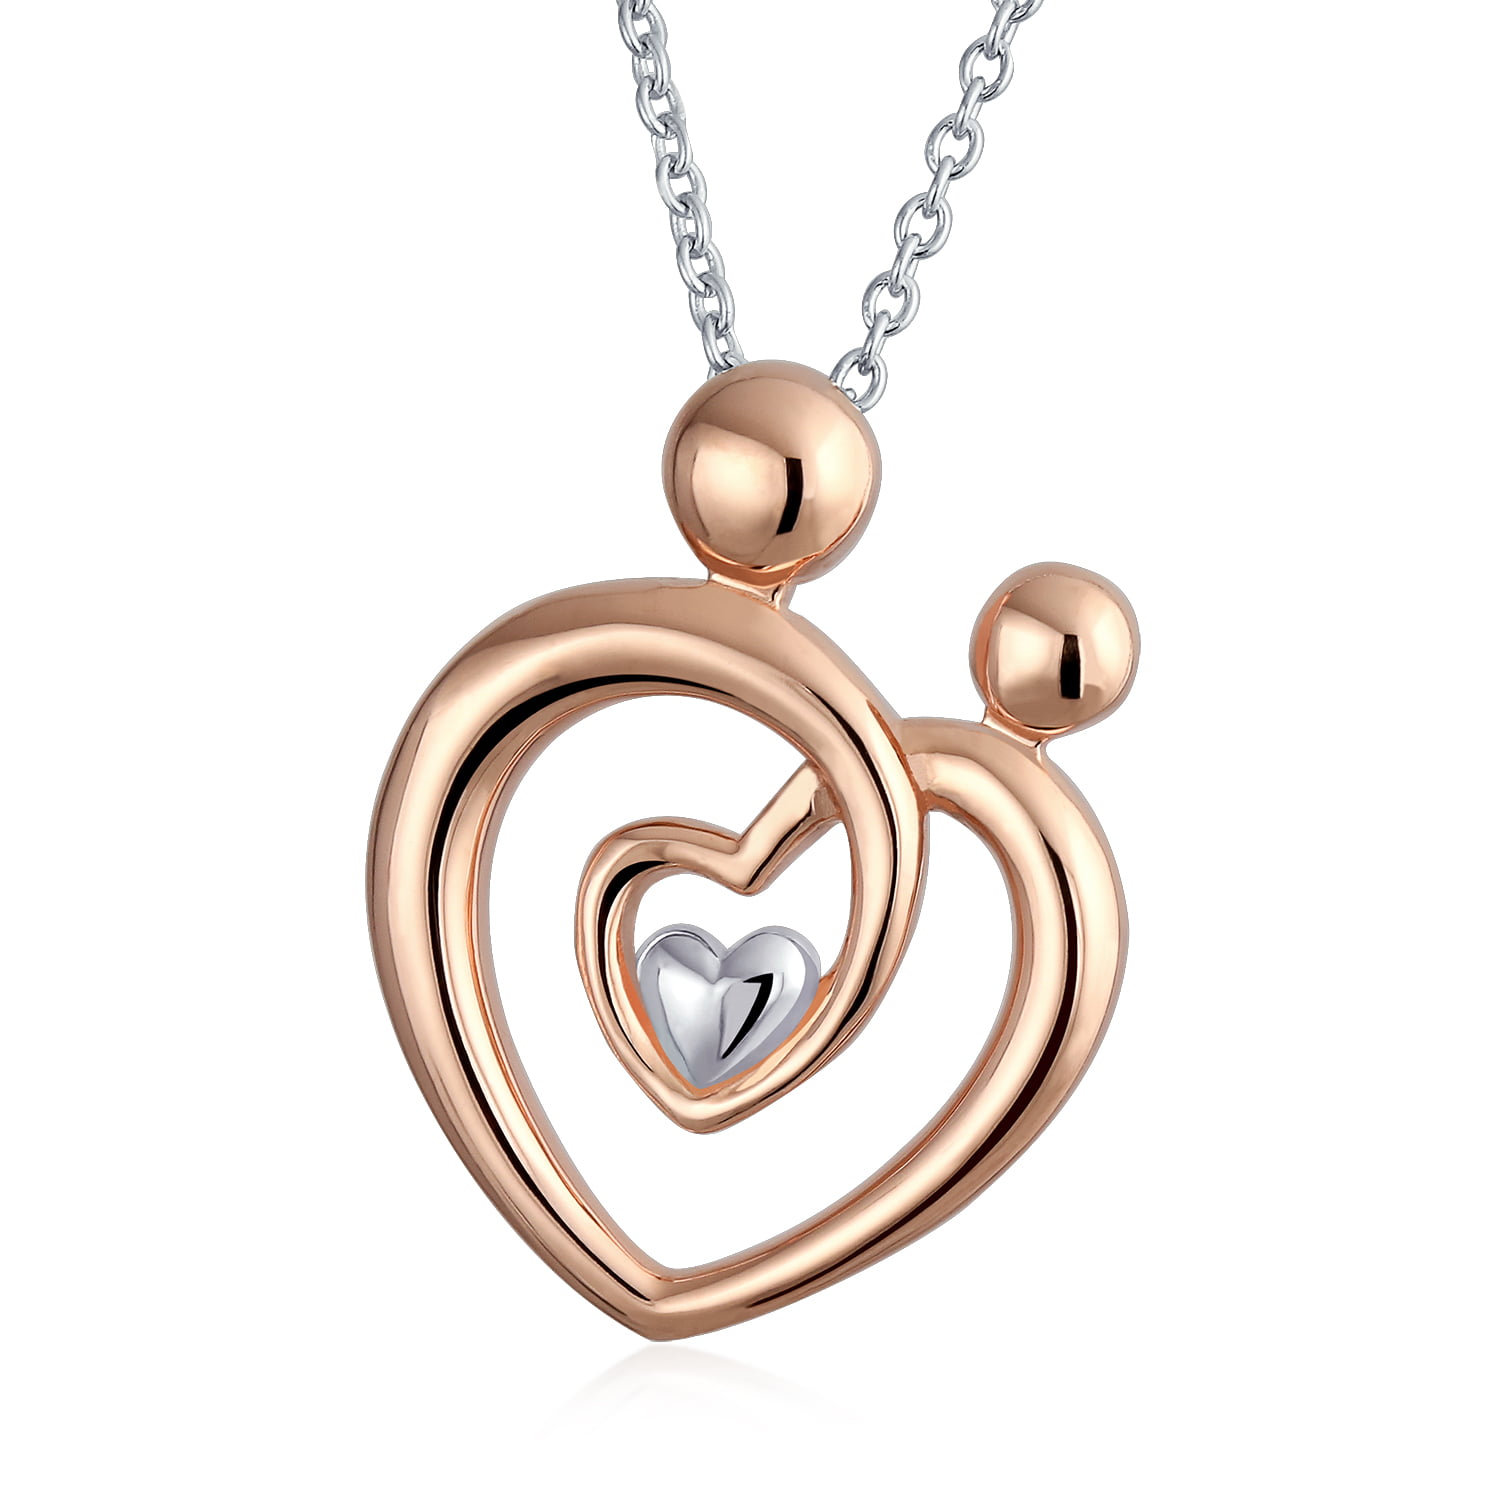 Sparkly Bride Mother Mum Mom Child Family Heart Pendant Necklace Chocolate CZ Rose Gold-Flashed Women Fashion 18in 